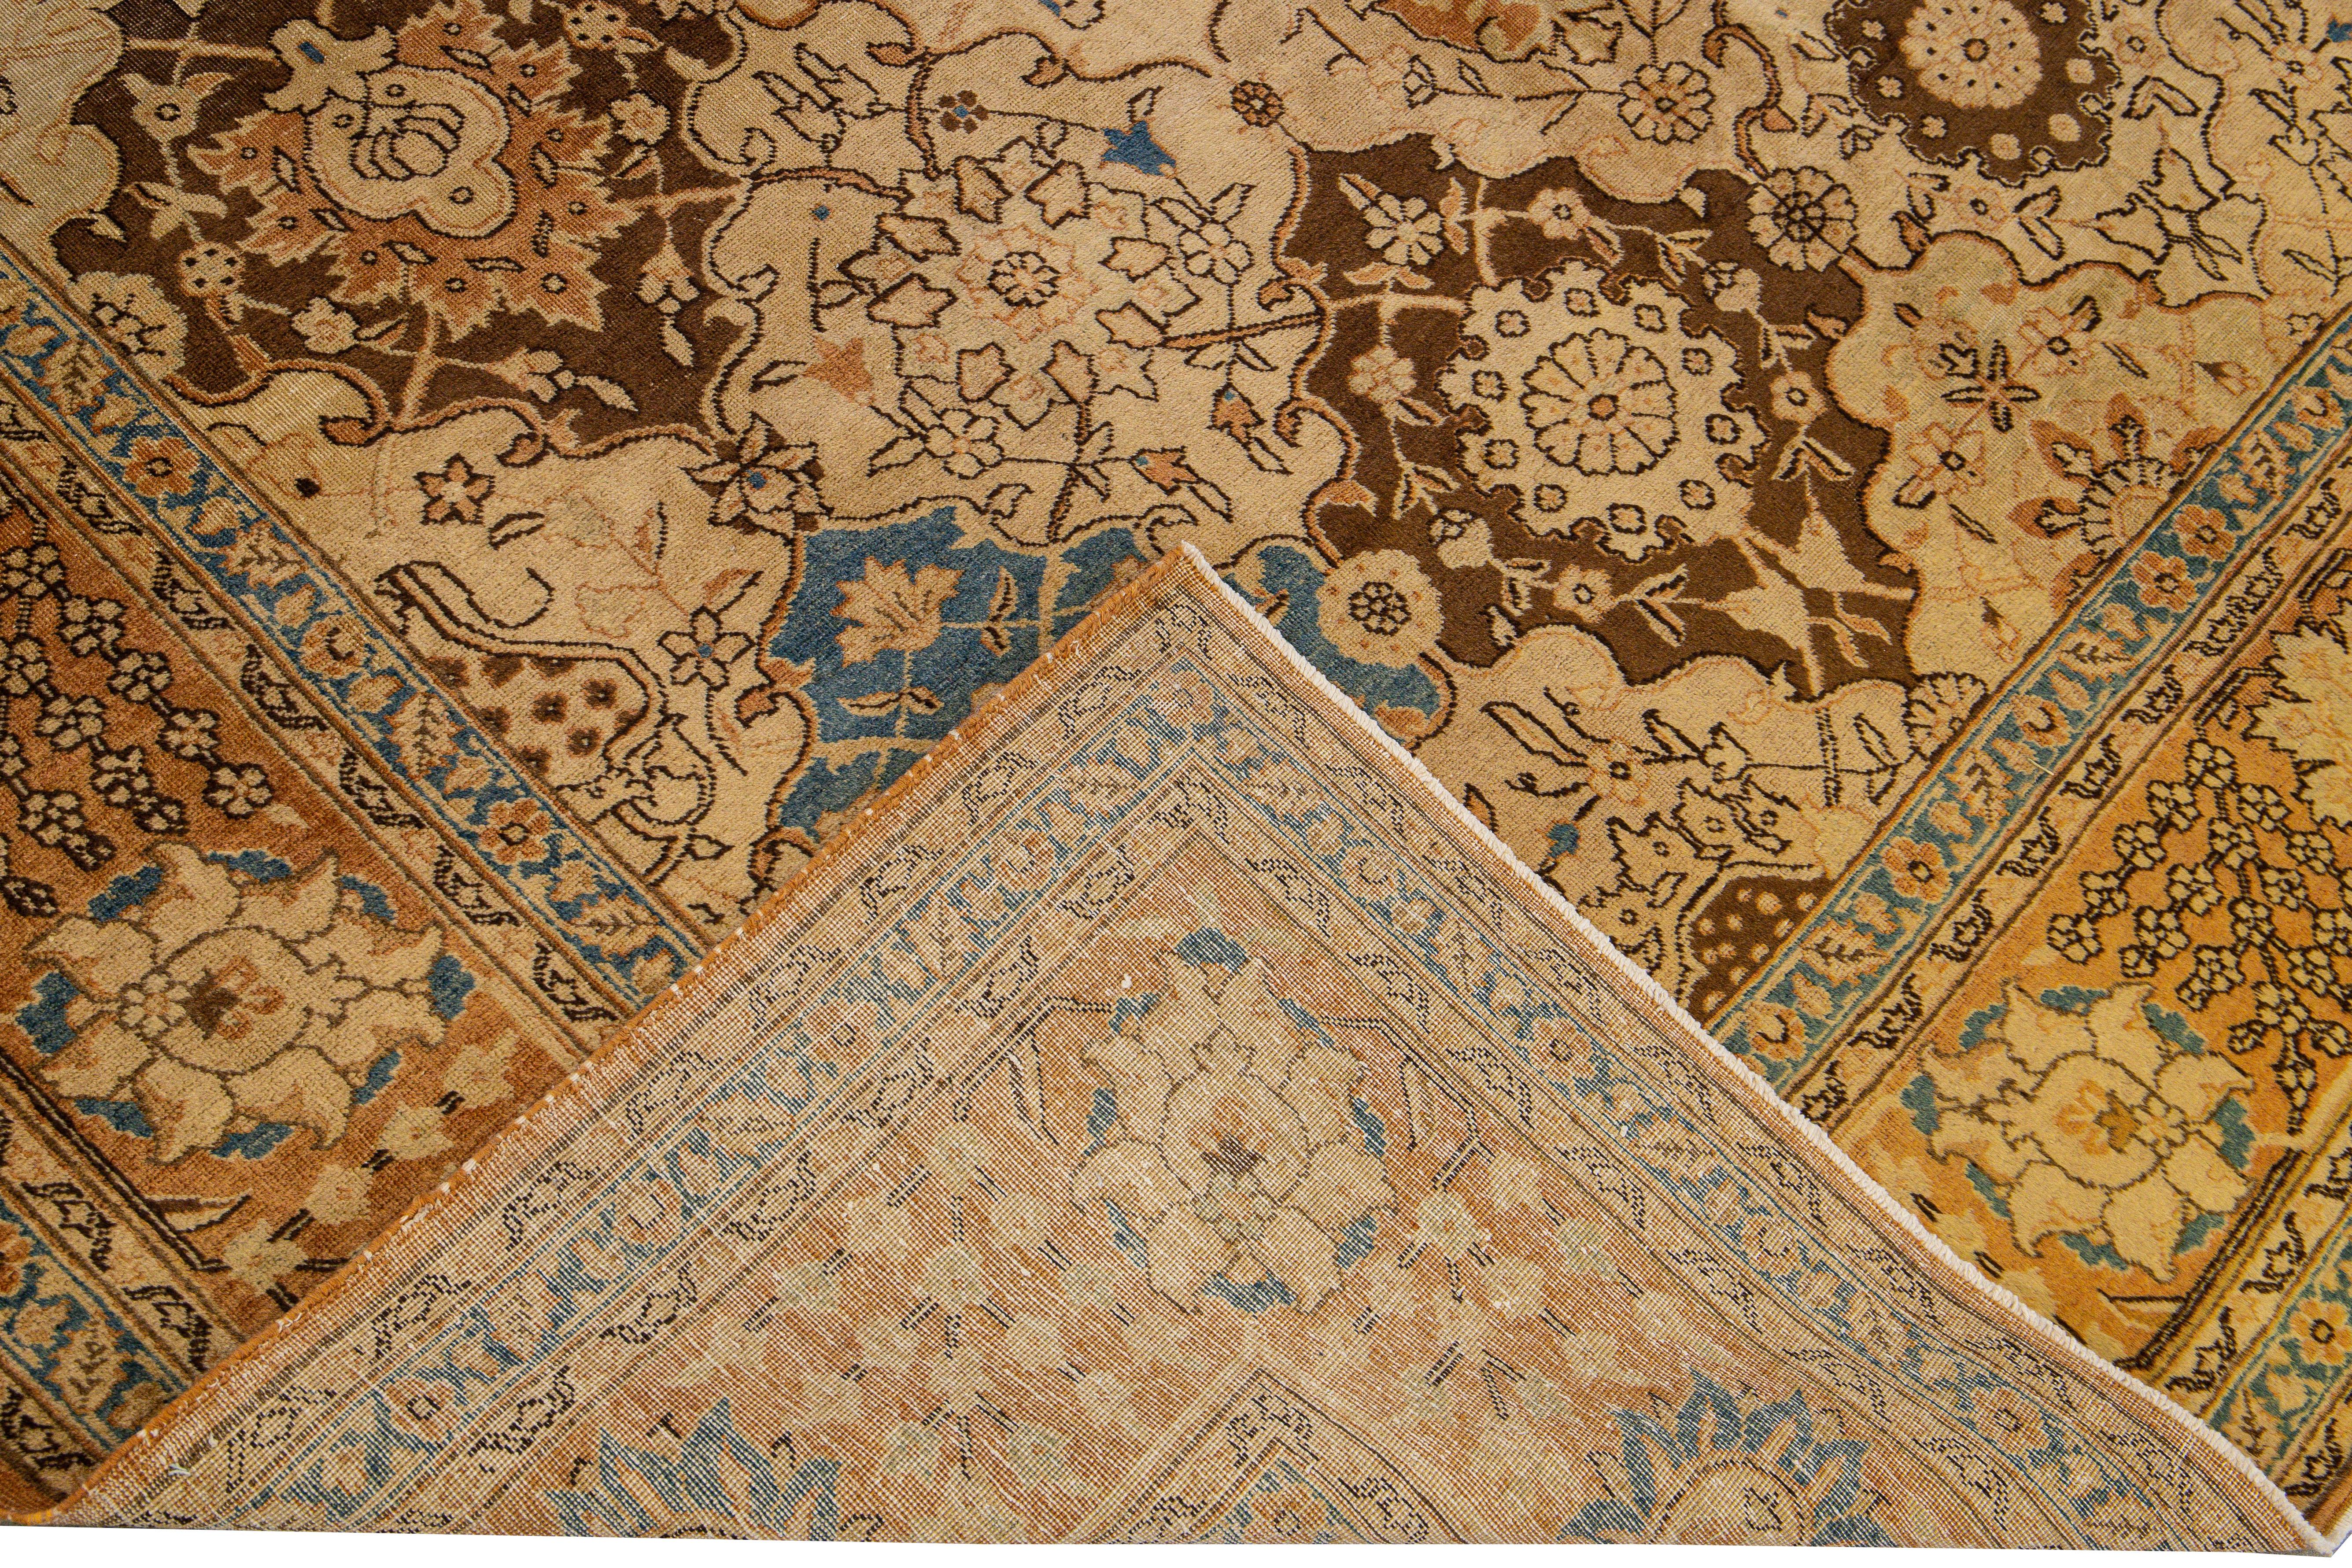 Beautiful Antique  Persian Tabriz hand-knotted wool rug with a beige field. This piece has blue and brown accents featuring an all-over multi-medallion floral pattern design. 
This rug measures: 8' x 10'8